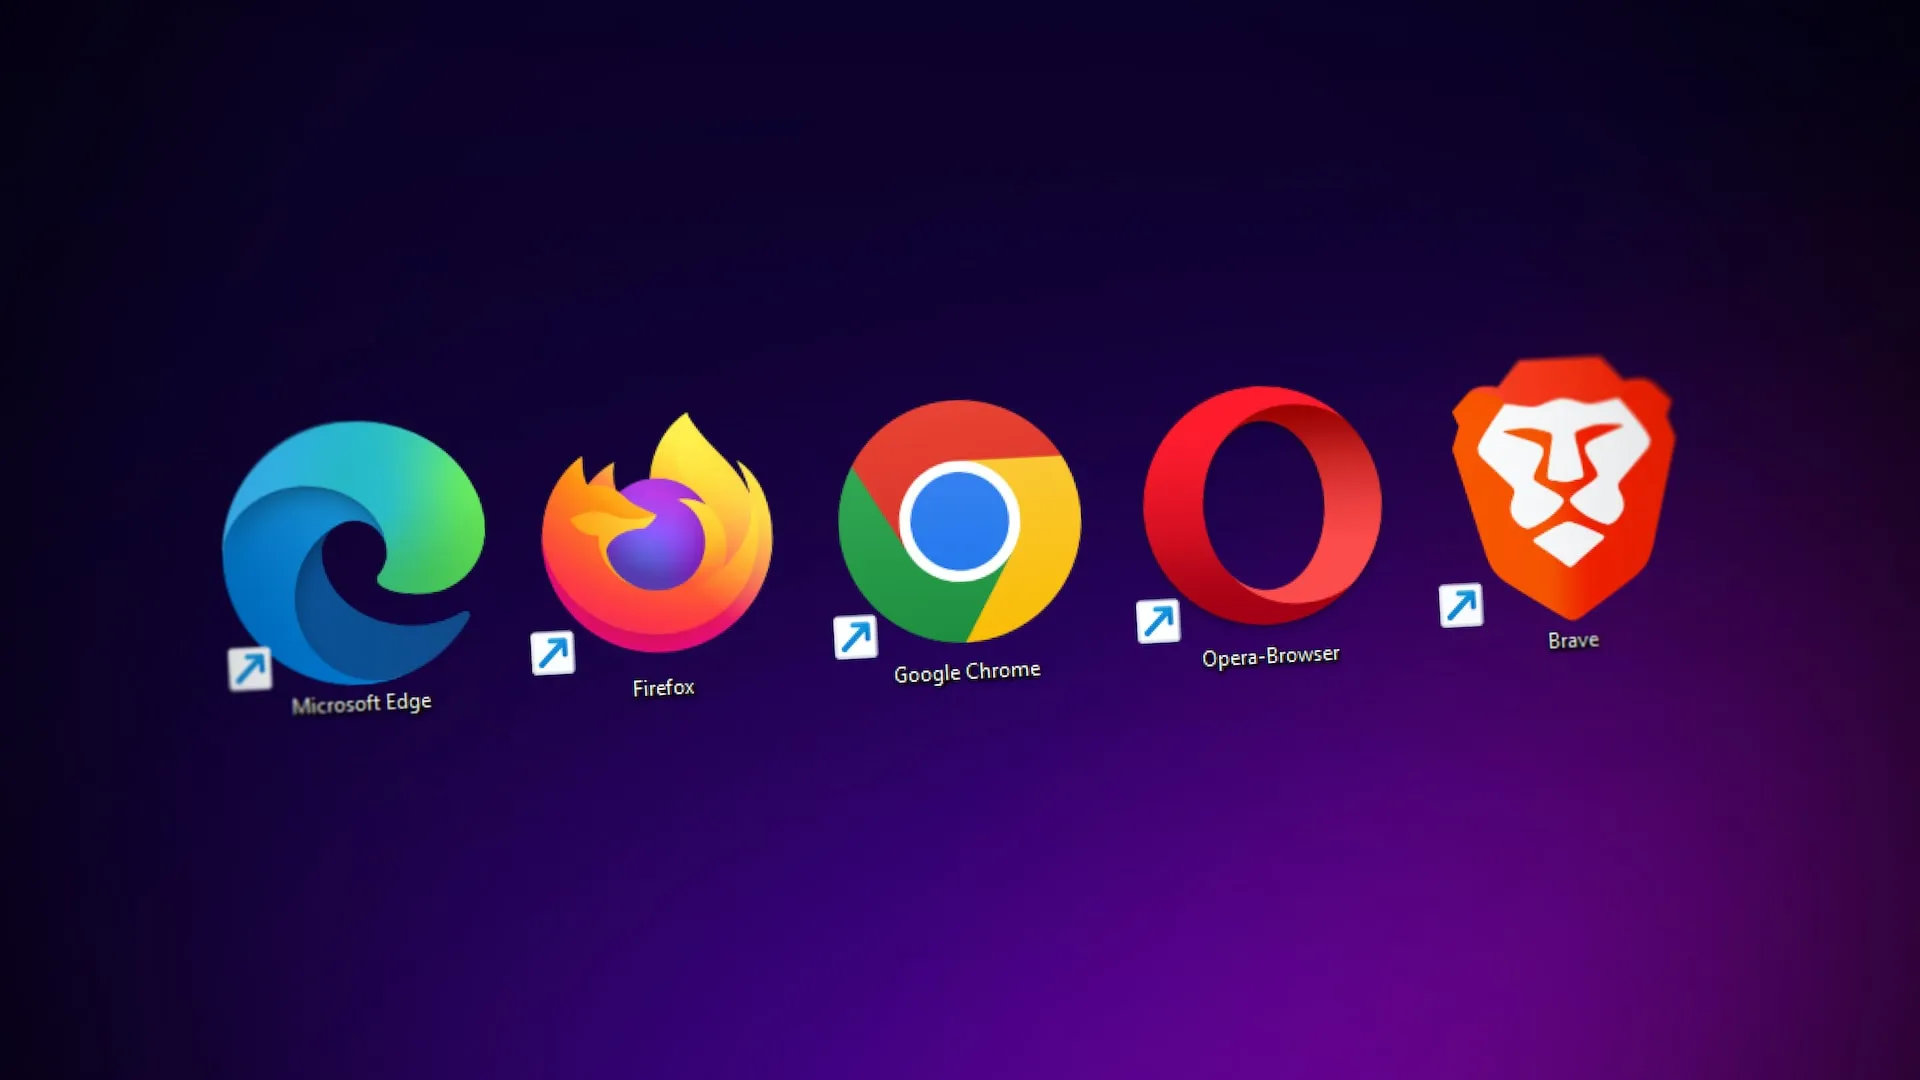 I have found this great article _How browsers work_ on web.dev recently explaining how browsers work in detail. I strongly recommend this article as it will help you understand browsers and how they work in the background and interact with HTML, CSS, and JavaScript.